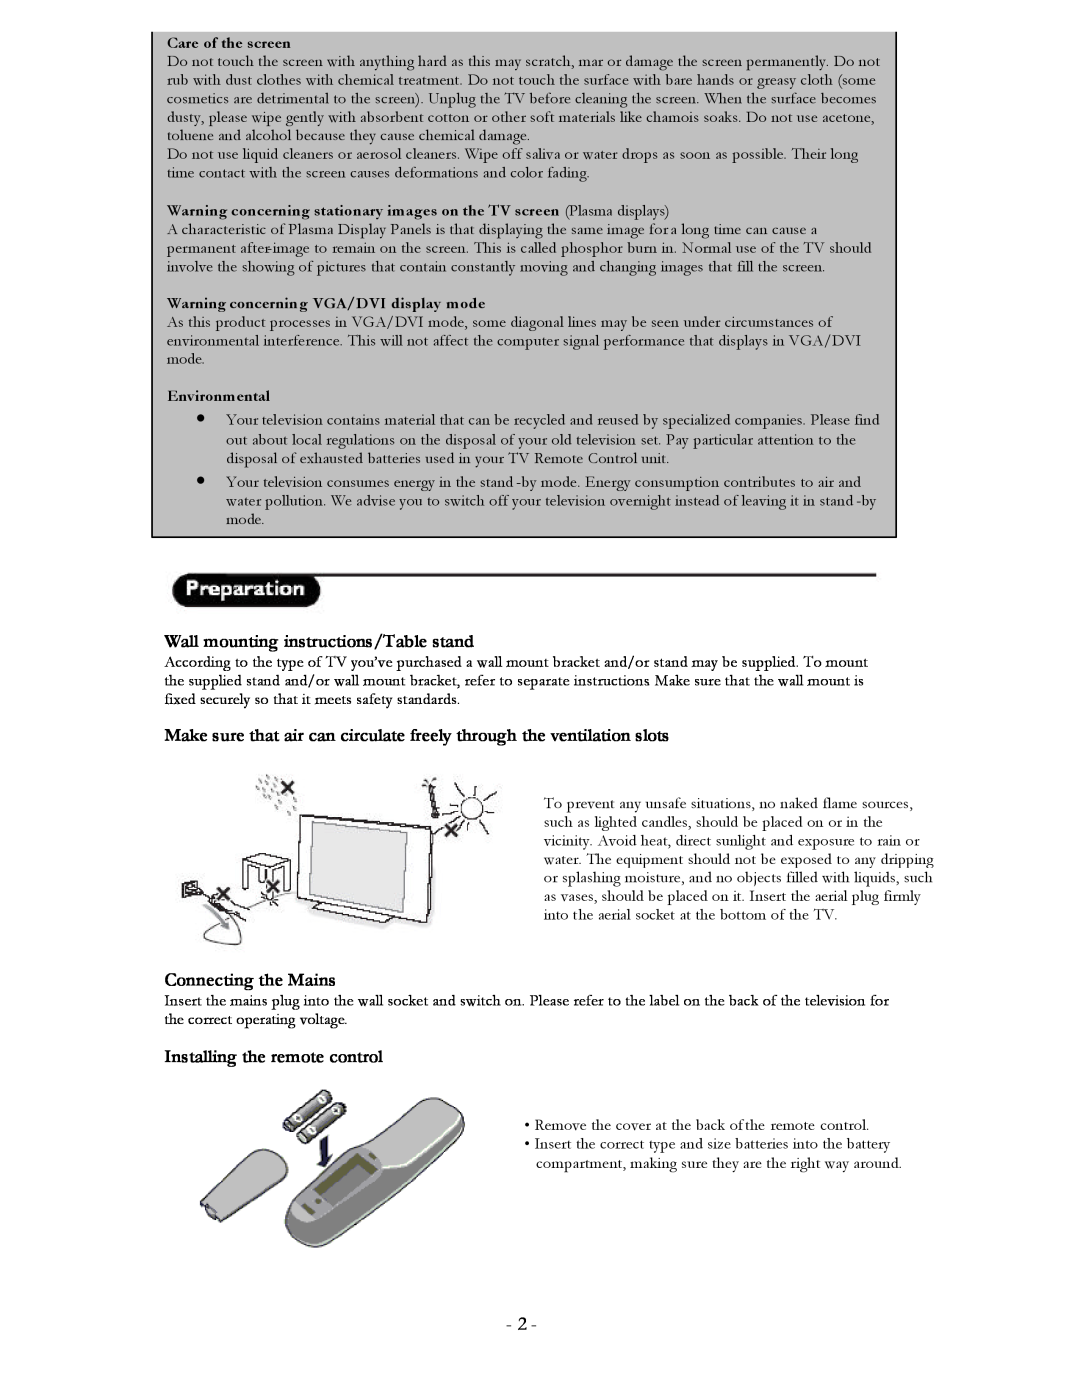 Philips 20FT3310/37 user manual Wall mounting instructions/Table stand, Connecting the Mains, Installing the remote control 